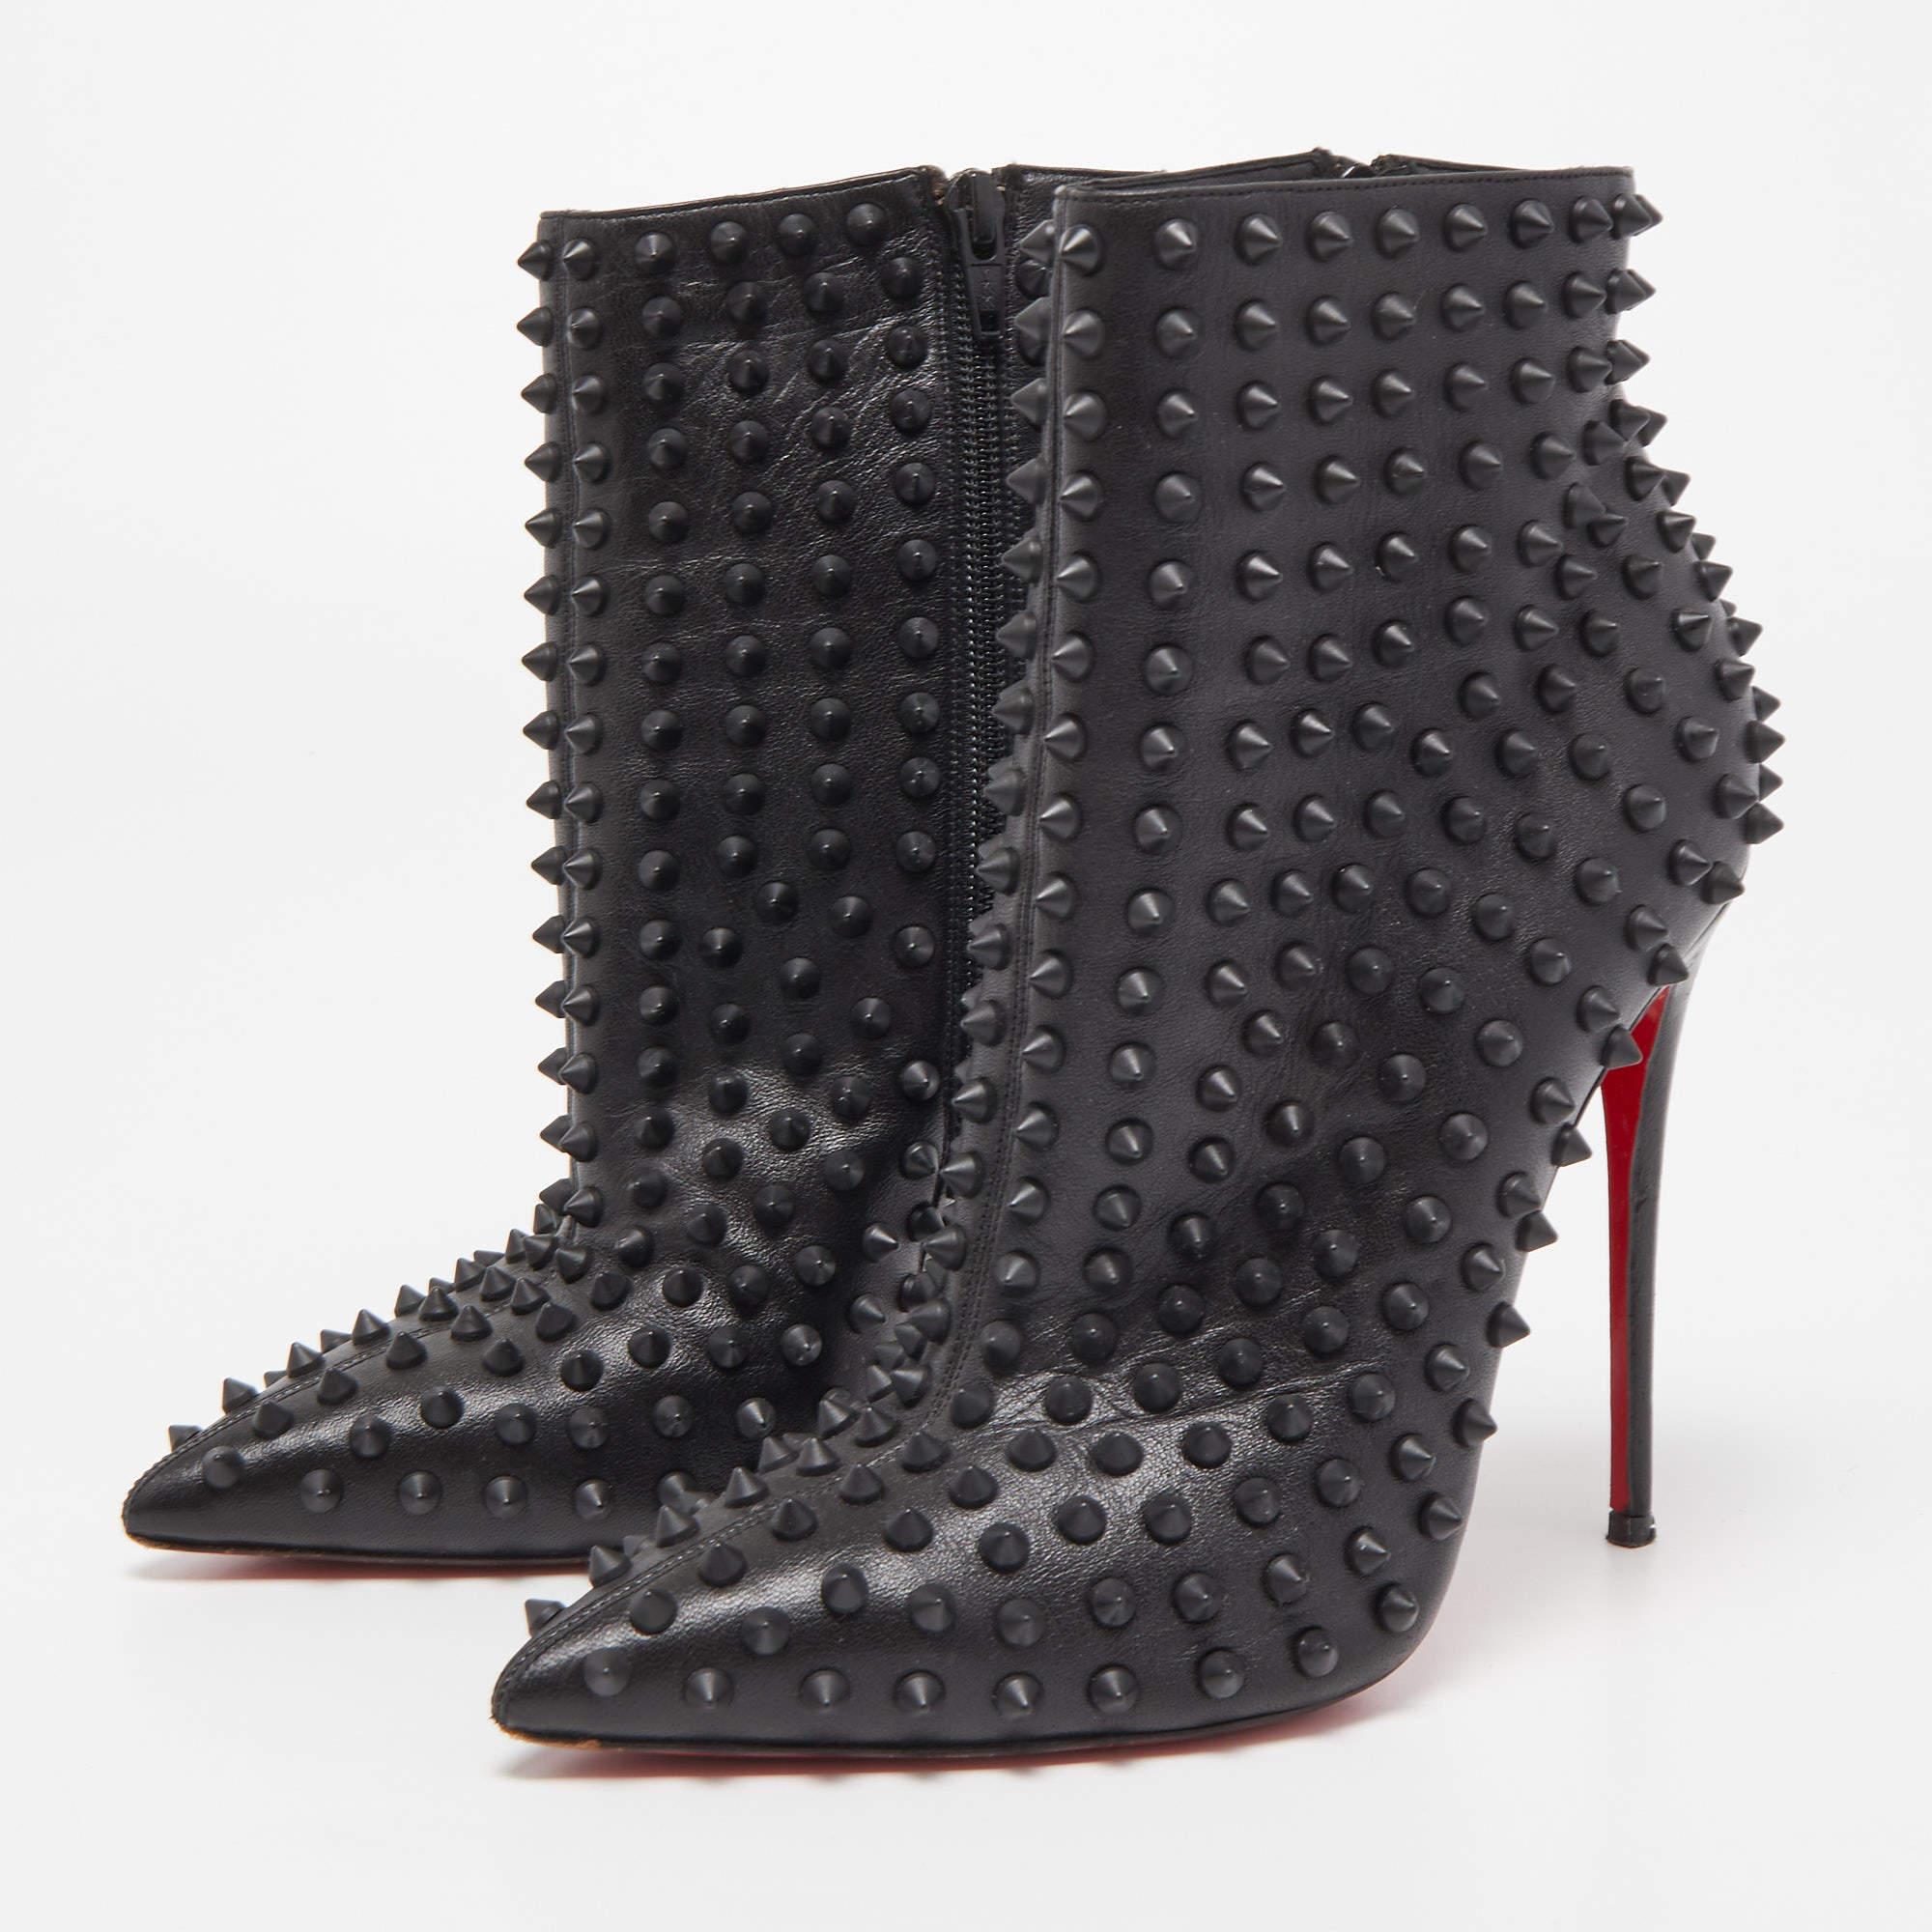 Christian Louboutin Black Leather Snakilta Spike Ankle Booties Size 38 4